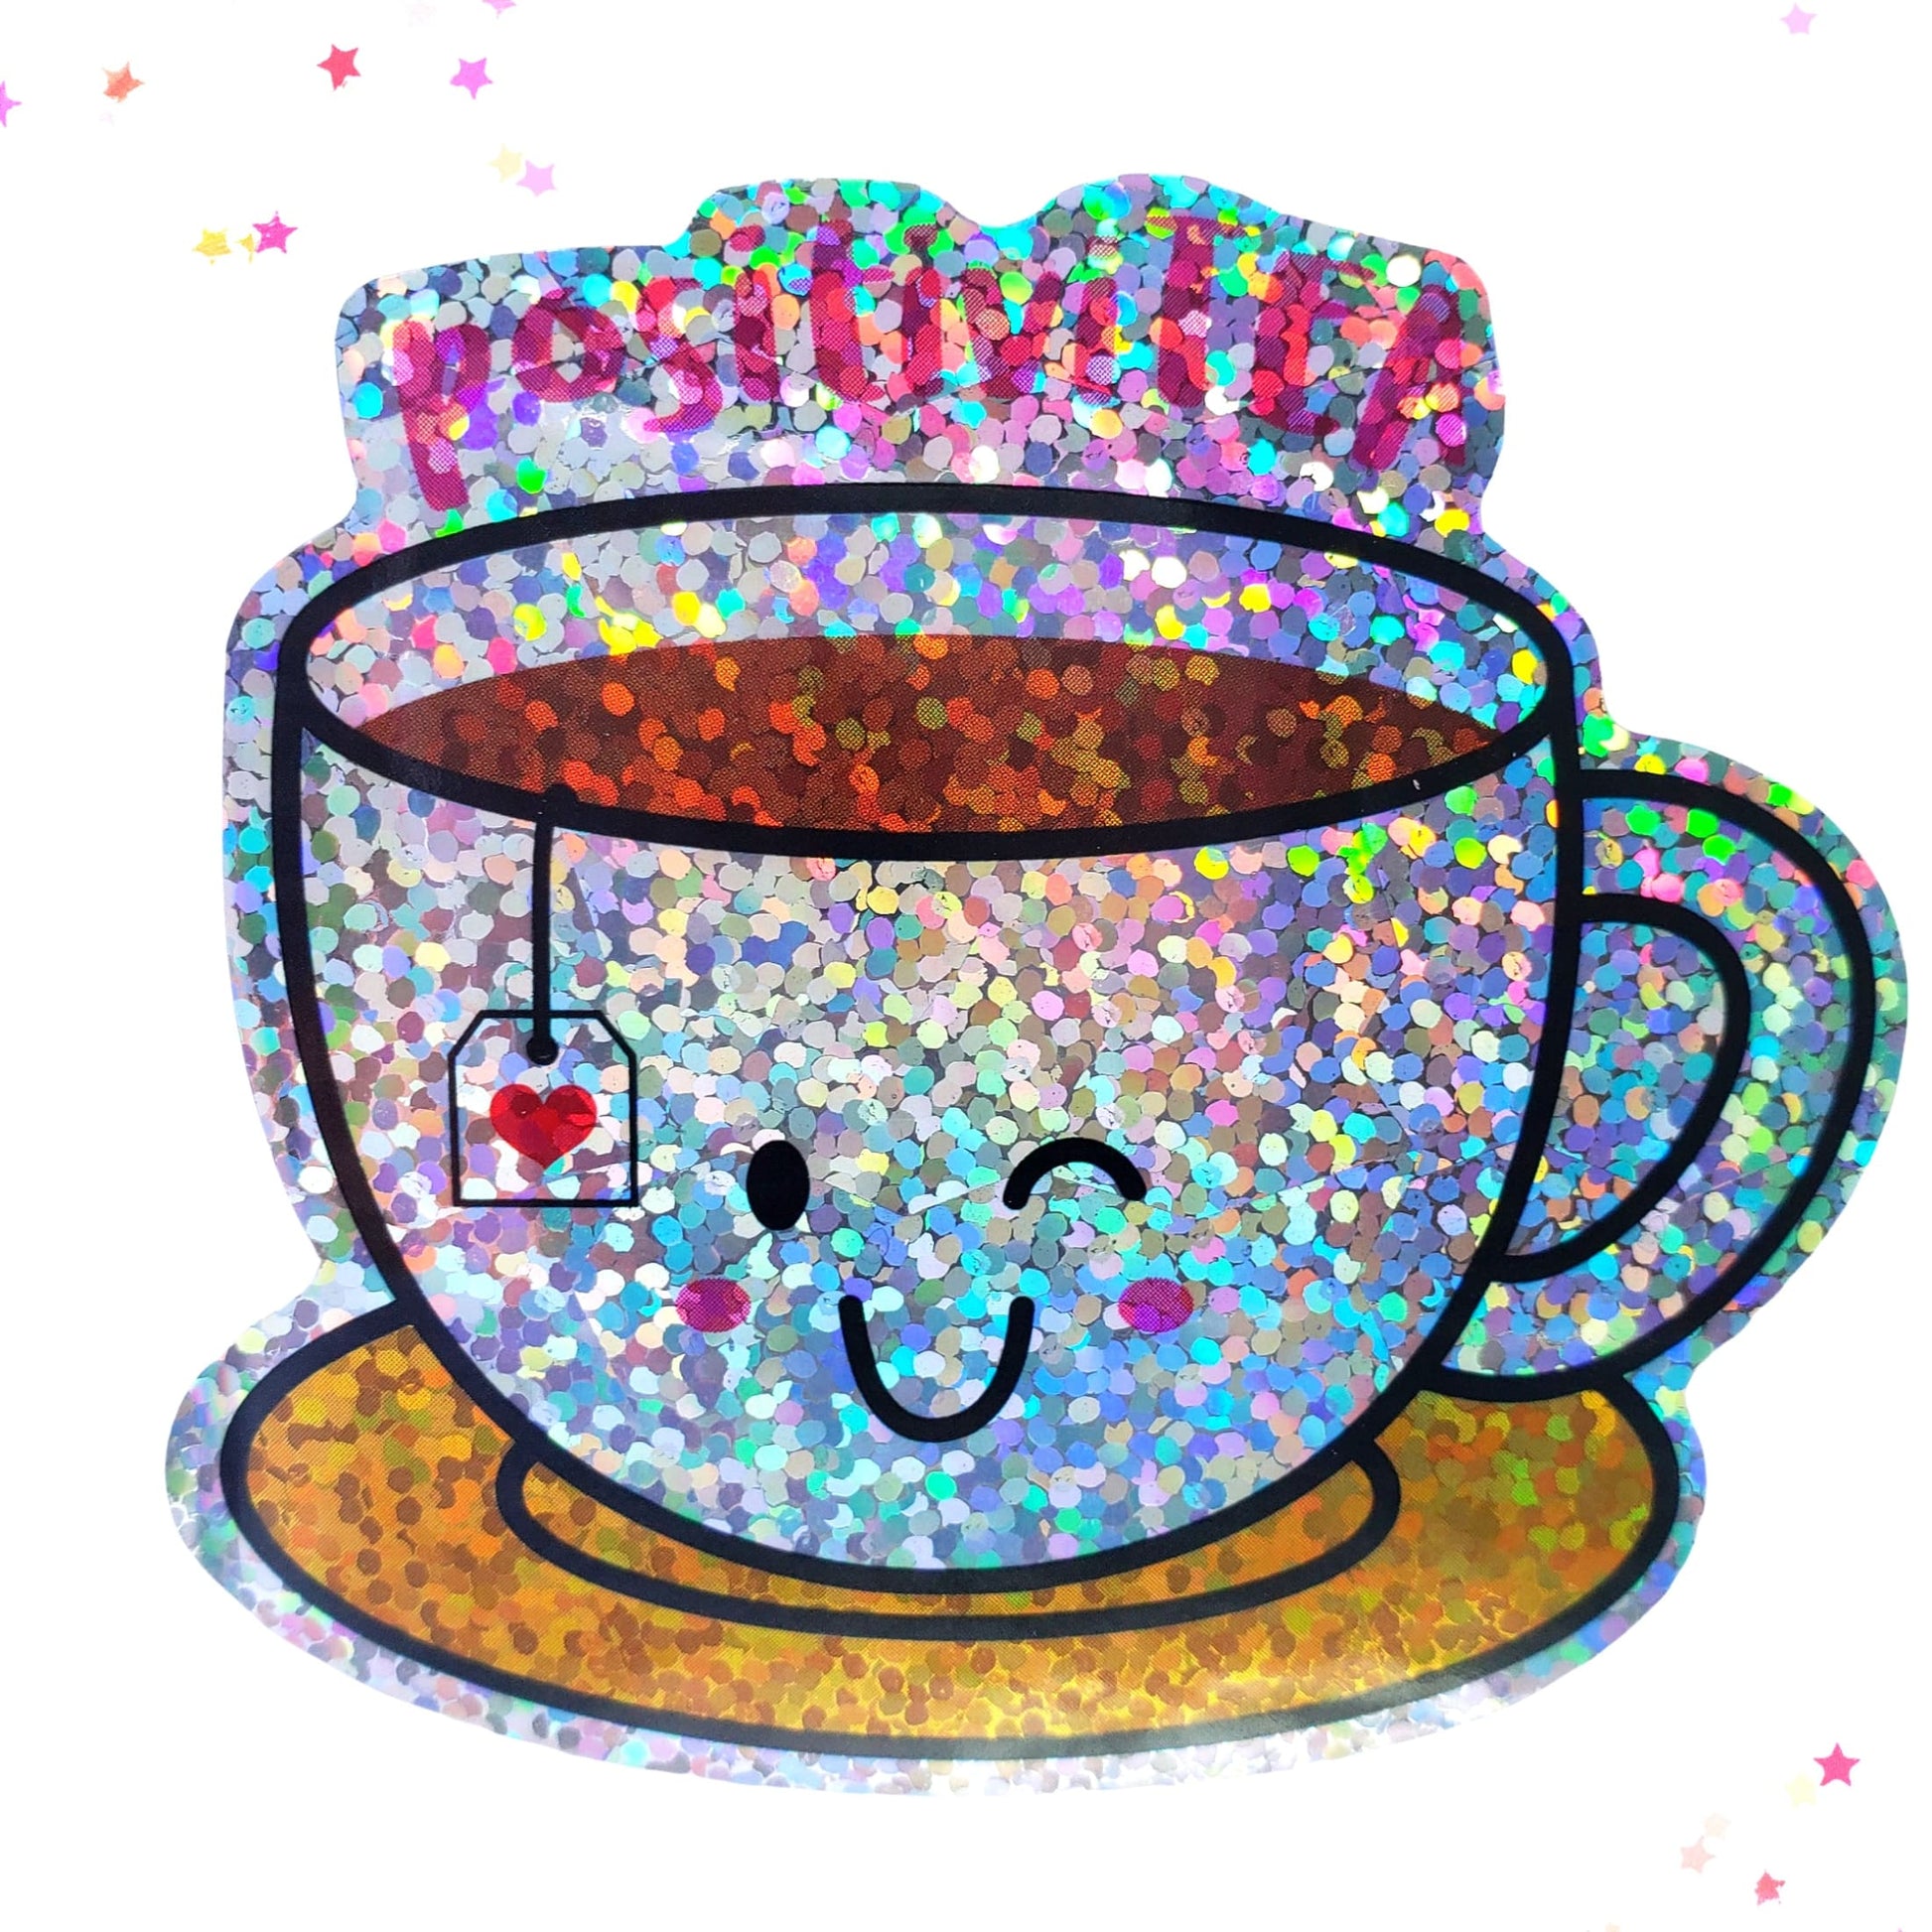 Premium Sticker - Sparkly Holographic Glitter PositiviTEA Tea Cup from Confetti Kitty, Only 2.00